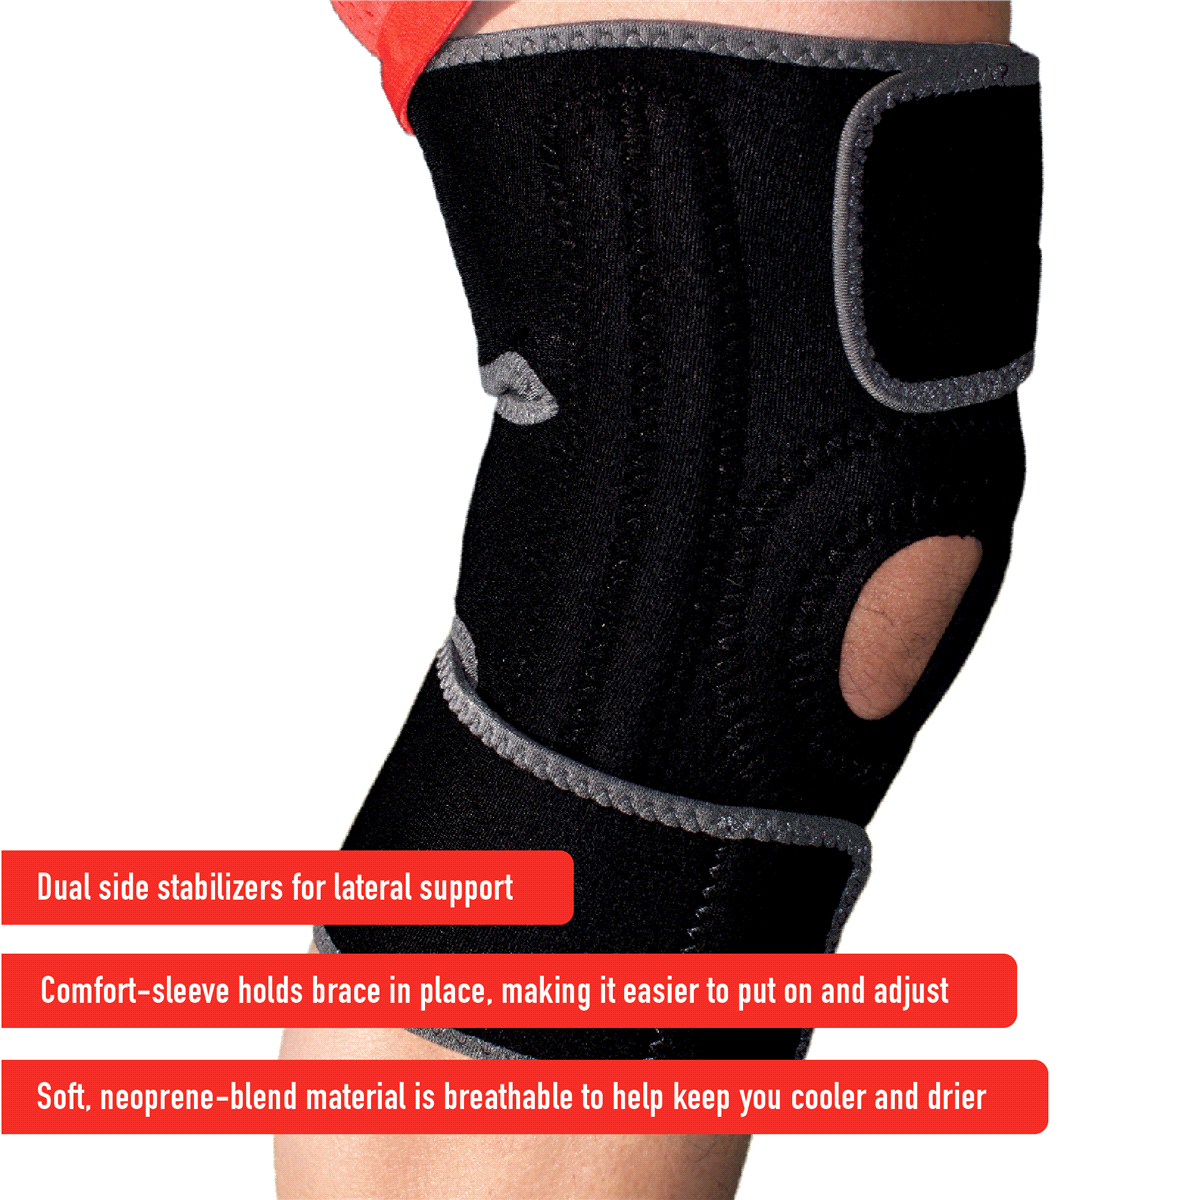 slide 5 of 17, ACE Adjustable Knee Brace with Dual Side Stabilizers, 1 ct